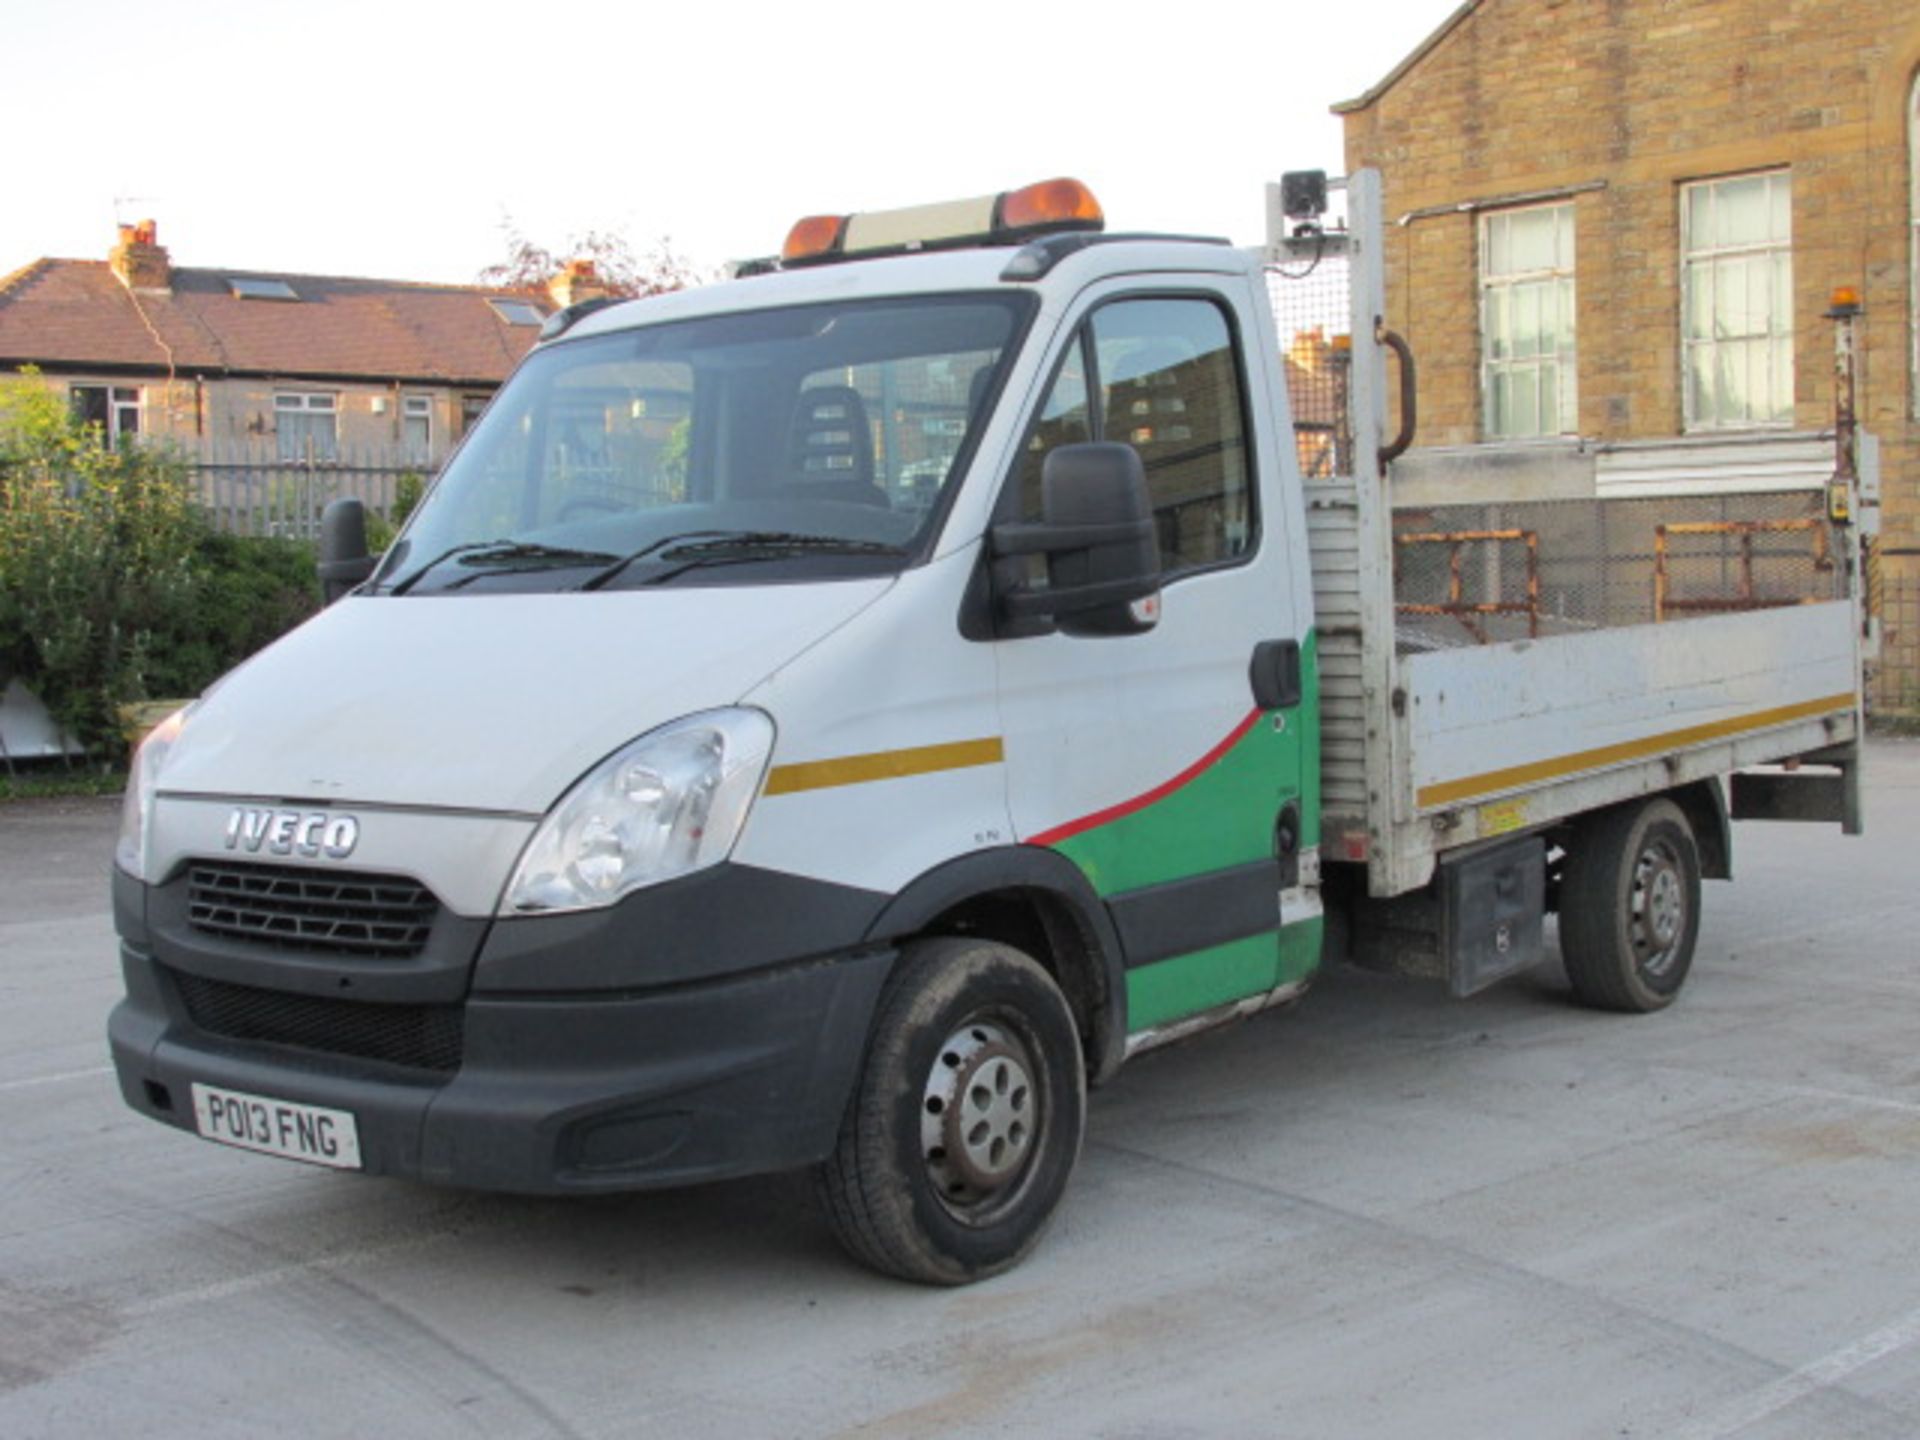 2013 Iveco Daily 35S13 Diesel Chassis Cab 3450 Wheelbase DropSide Pickup Truck with Tail Lift - Image 2 of 12